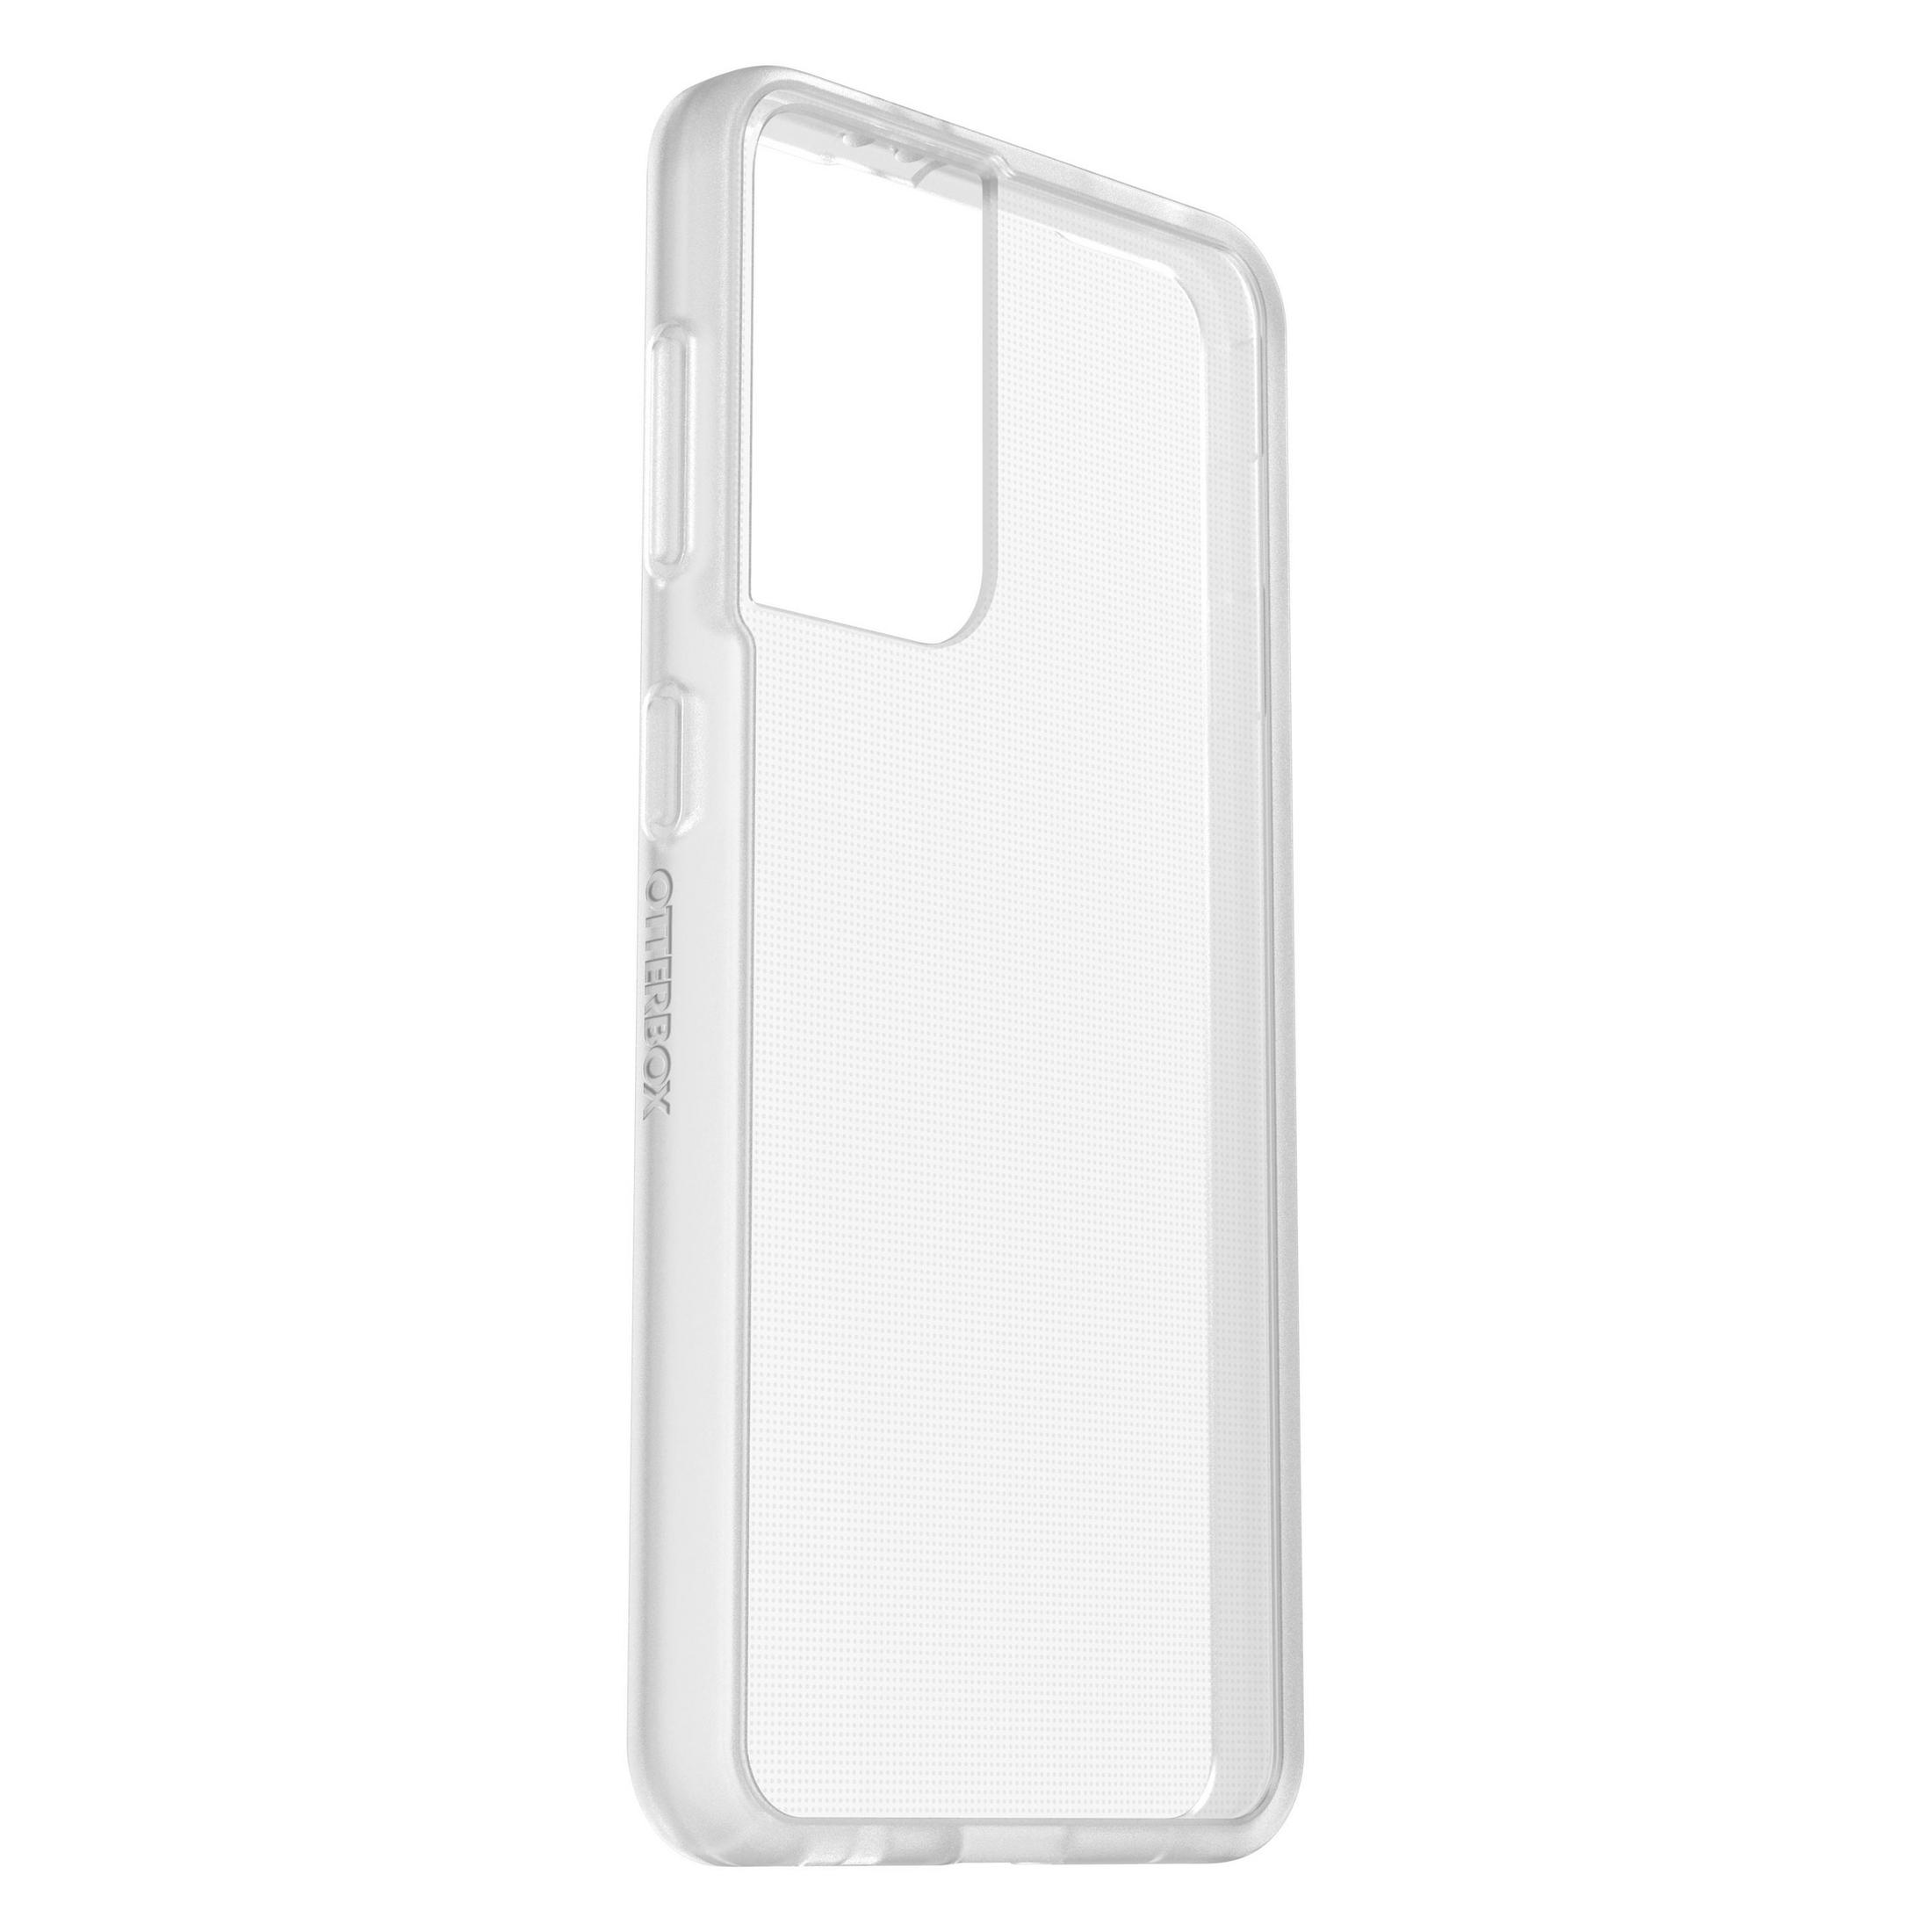 OTTERBOX 78-80332 REACT Galaxy CLEAR, Transparent S21, Backcover, FILM CP + S21 Samsung